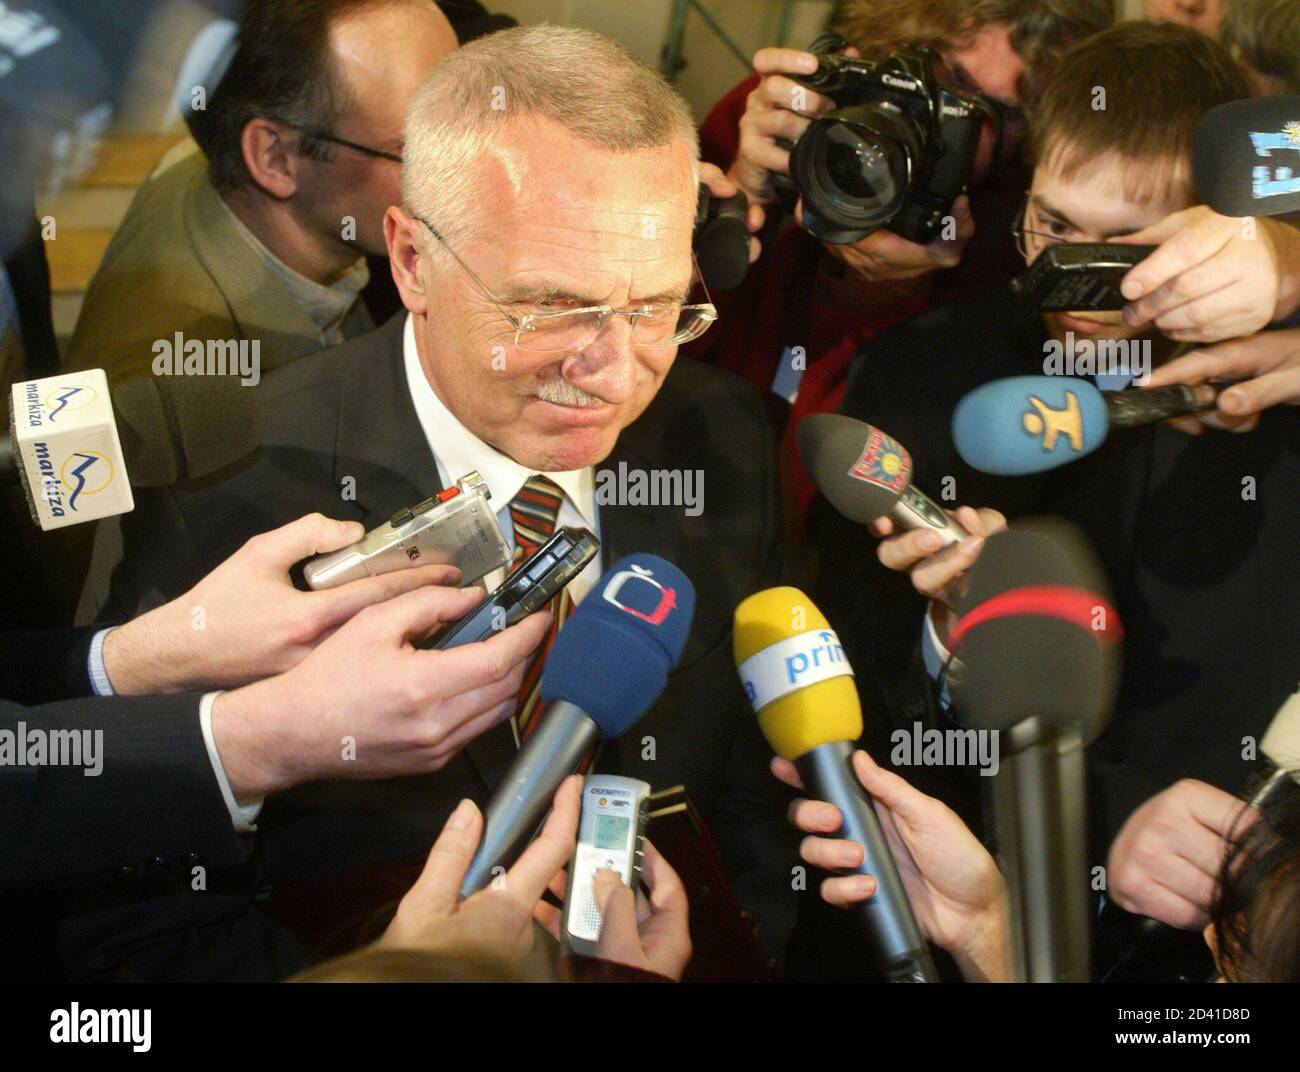 Former right-wing Czech Prime Minister Vaclav Klaus speaks to journalists after the first vote of the parlimentary session in the Spanish Hall at Prague Castle on January 24, 2003. Klaus won through to the second round on Friday in a presidential election to find a successor to Eastern Europe's elder statesman Vaclav Havel, a voting commission source said.  REUTERS/Petr Josek REUTERS Stock Photo